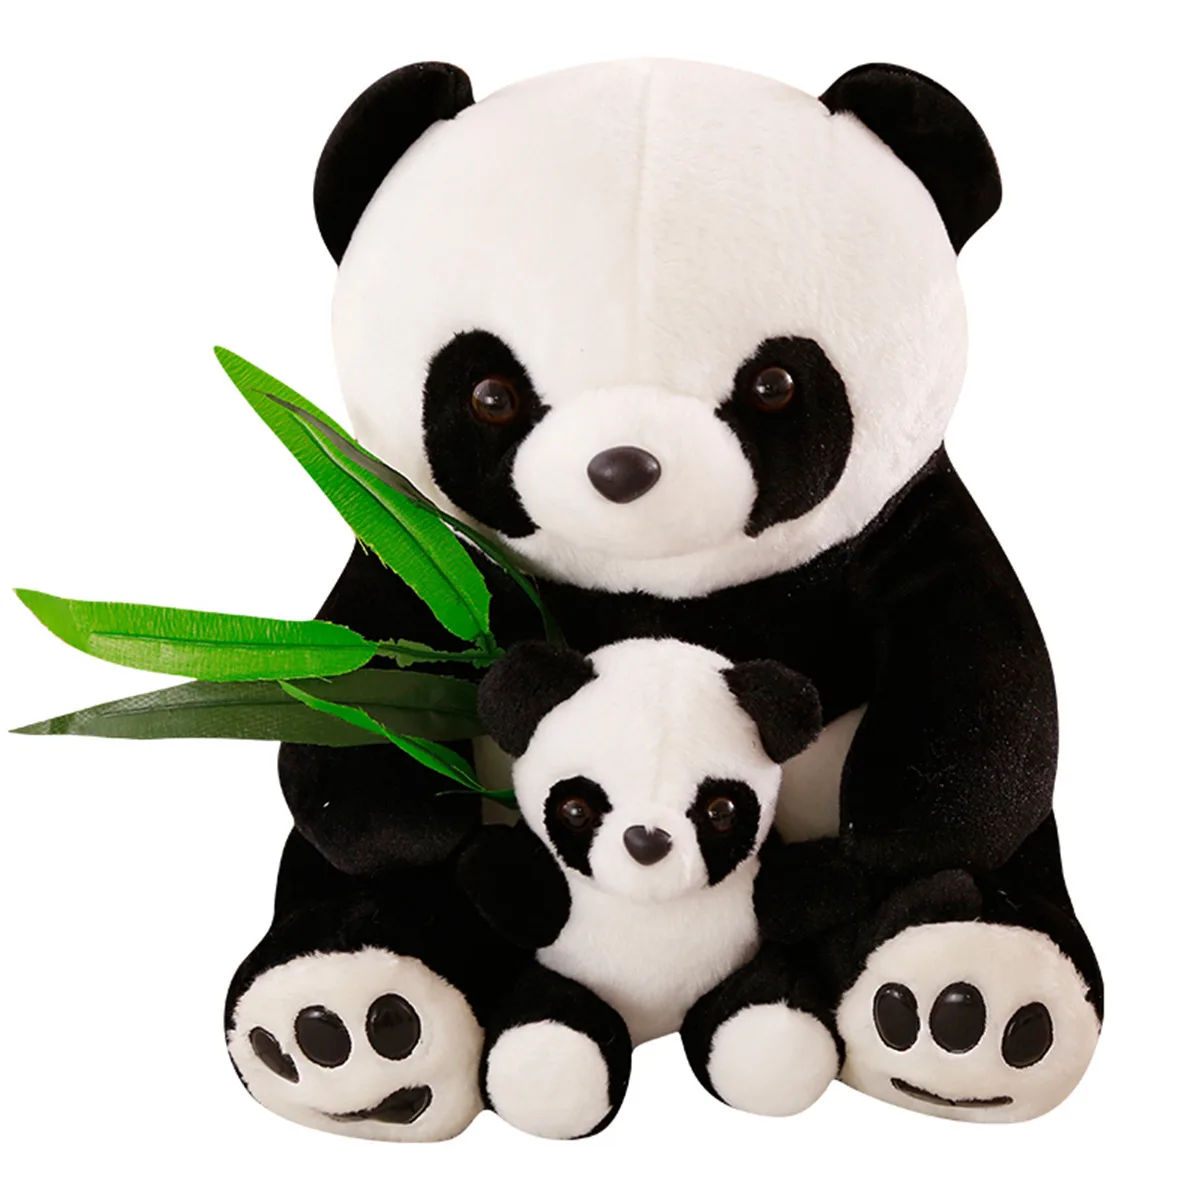 

New Plush Panda Toys Cute Stuffed Animal Doll Mother And Son Toy Gift for Children Friends Girls Home Decor Christmas skin